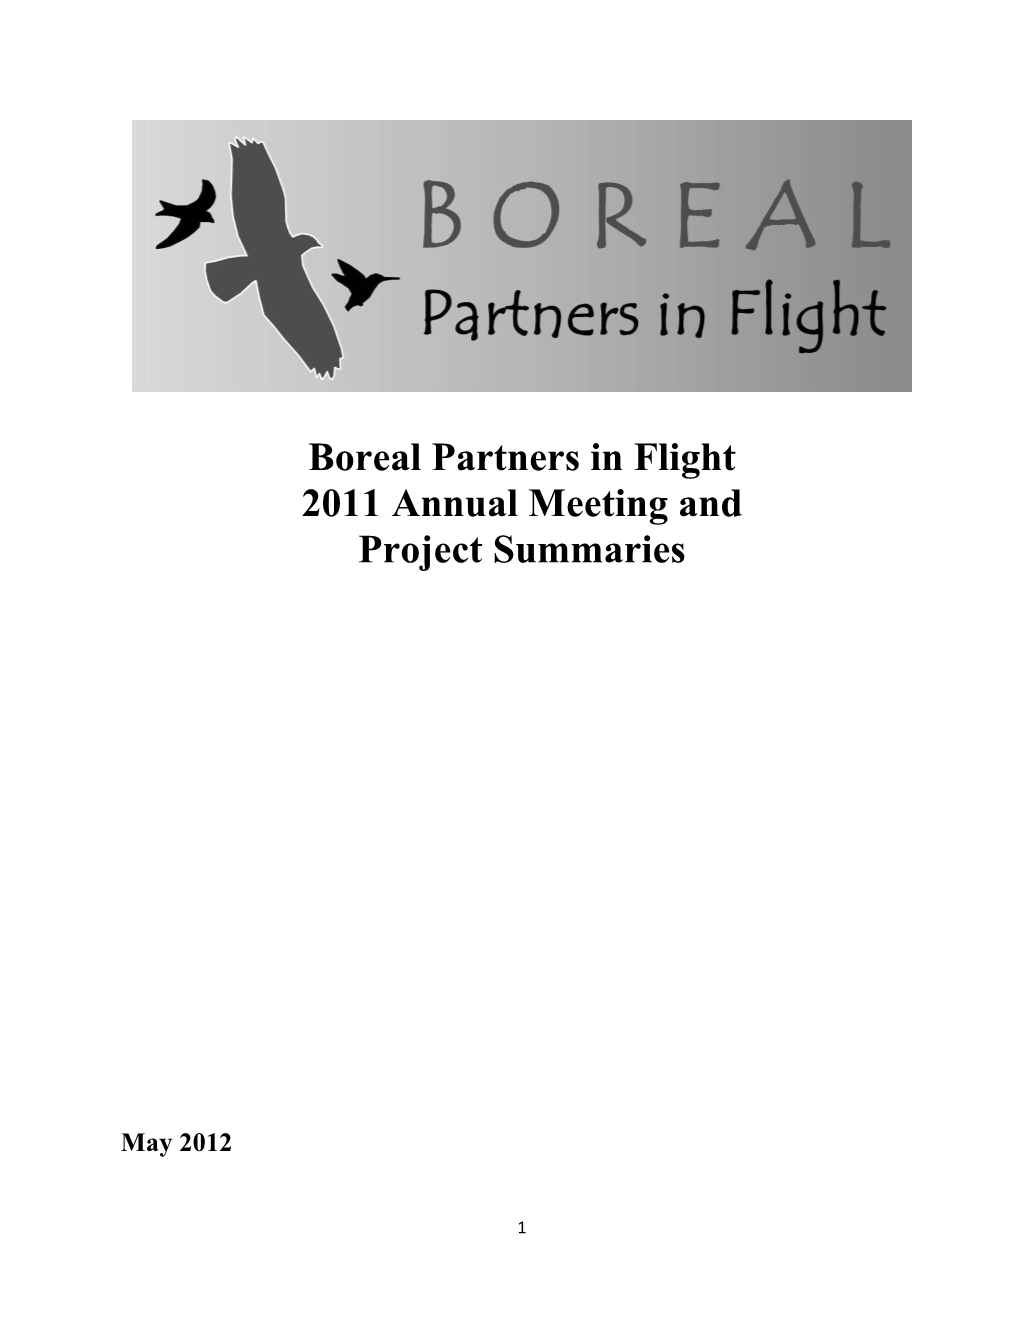 Boreal Partners in Flight 2011 Annual Meeting and Project Summaries